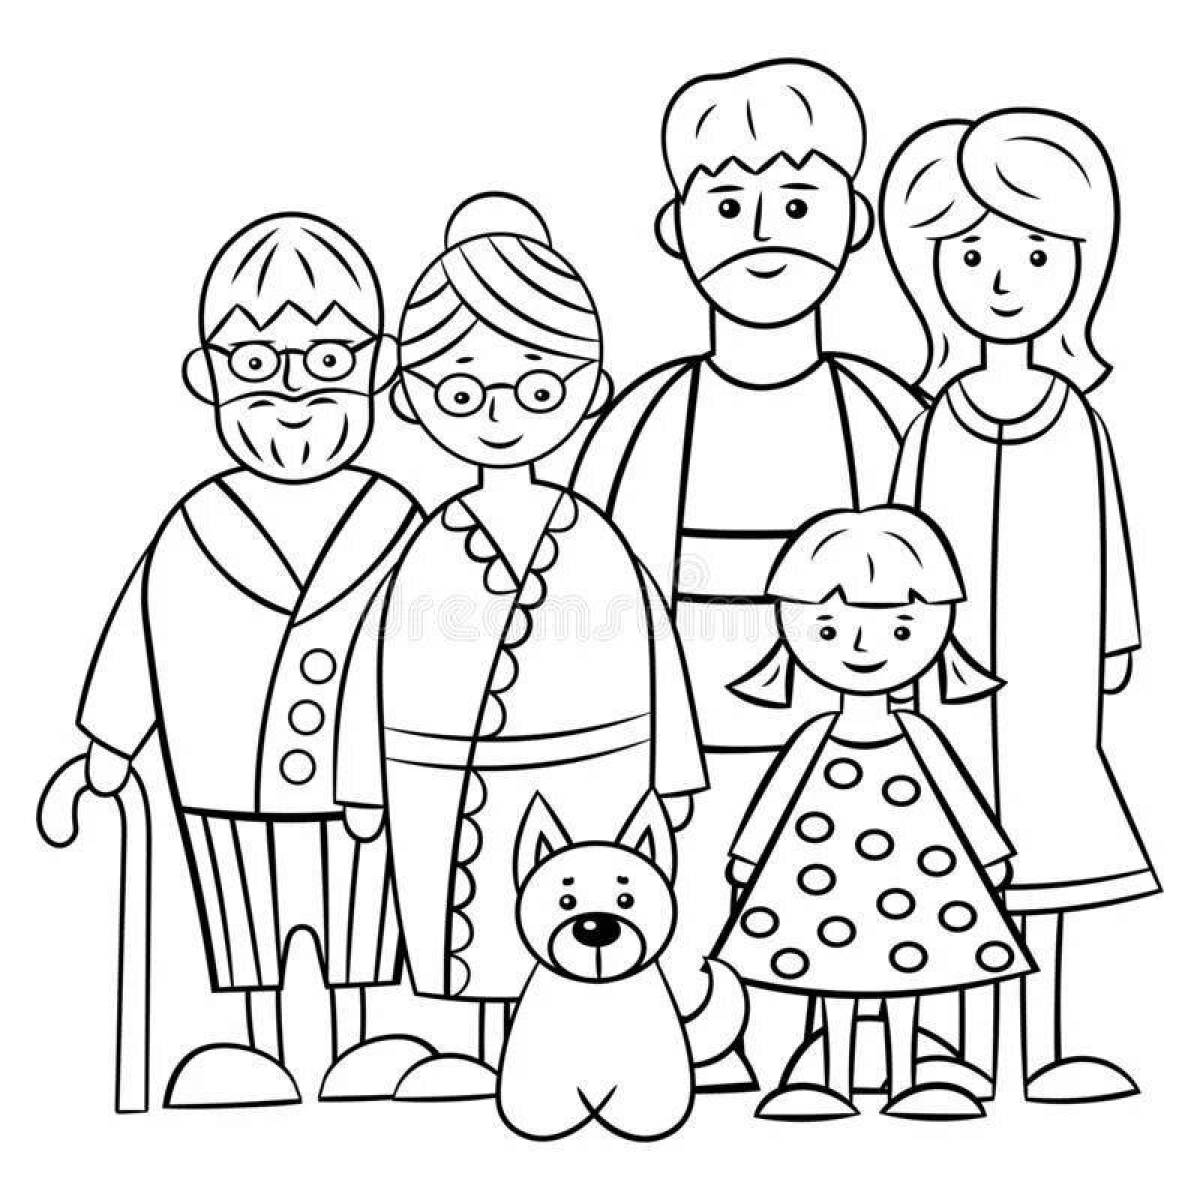 Caring coloring family of 4